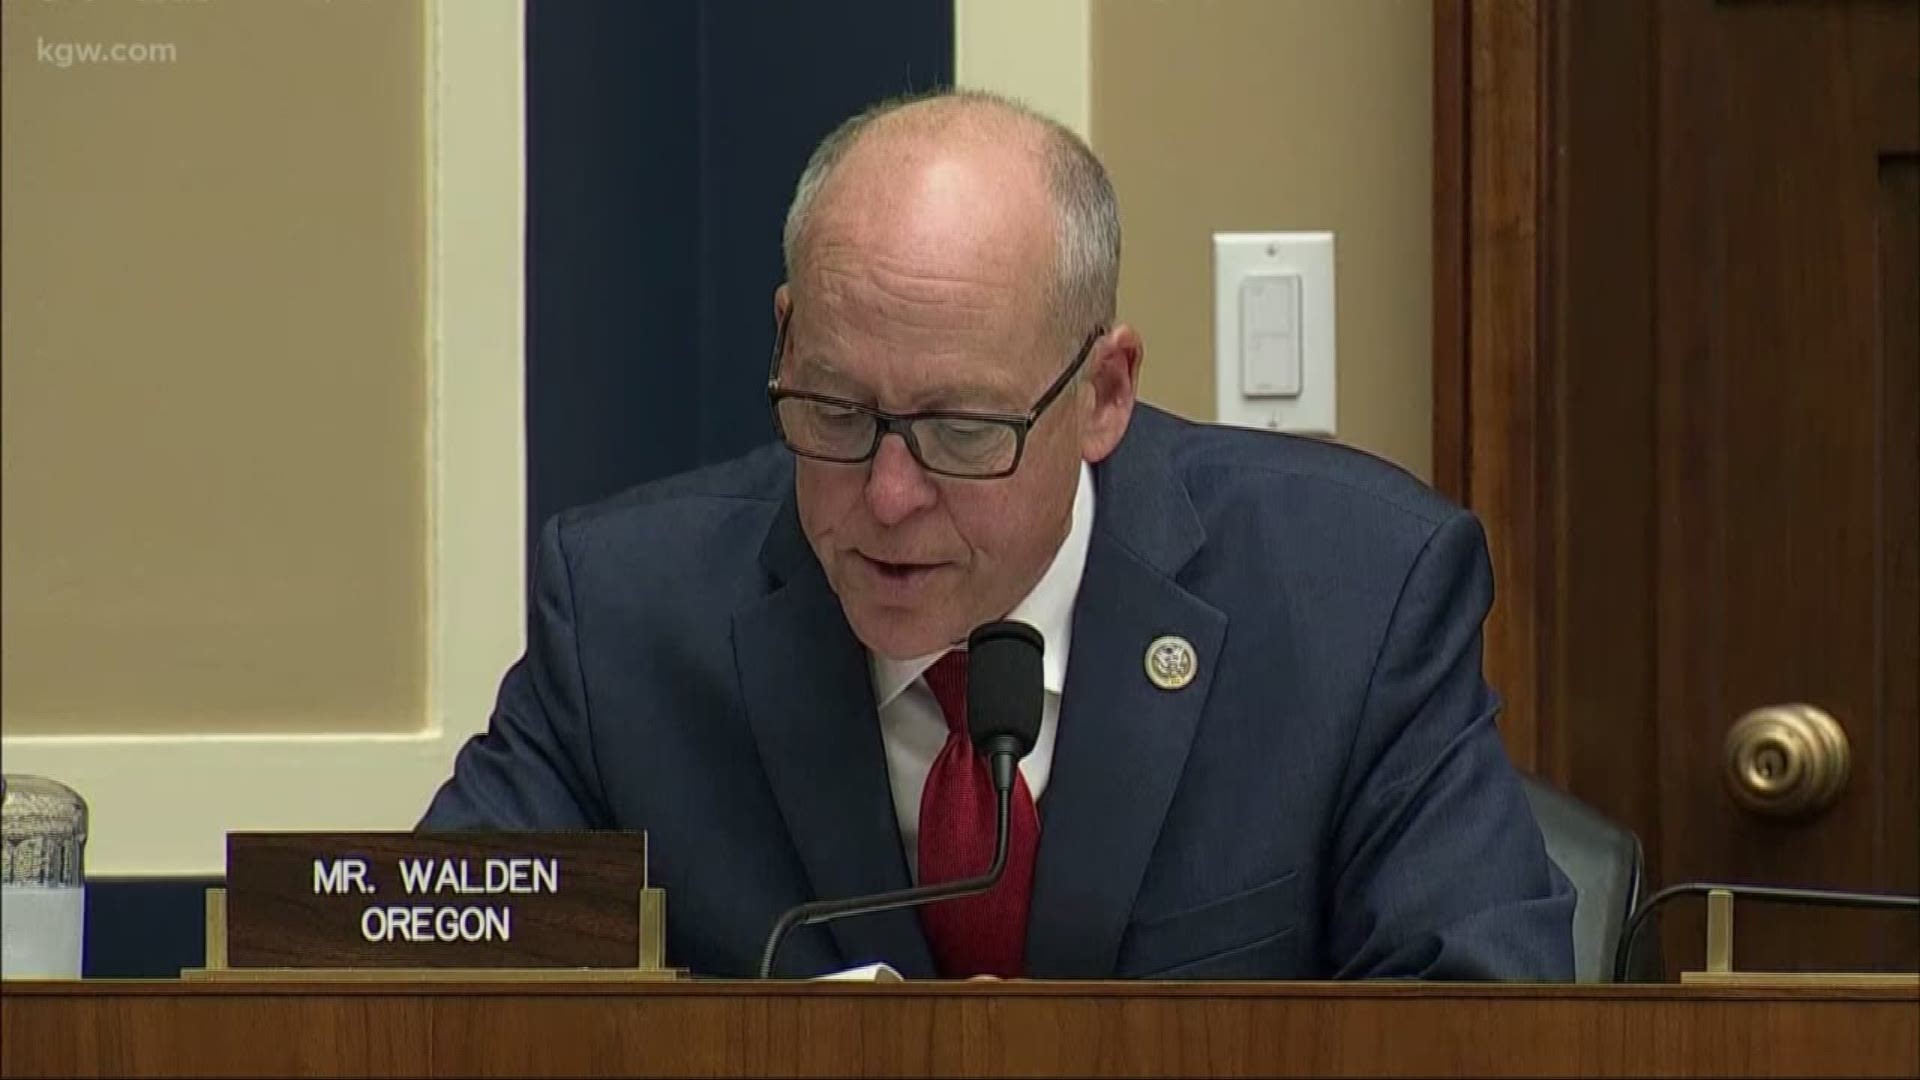 Rep. Greg Walden, the only Republican member of Congress in Oregon, will retire in January 2021. He serves Oregon's 2nd District.